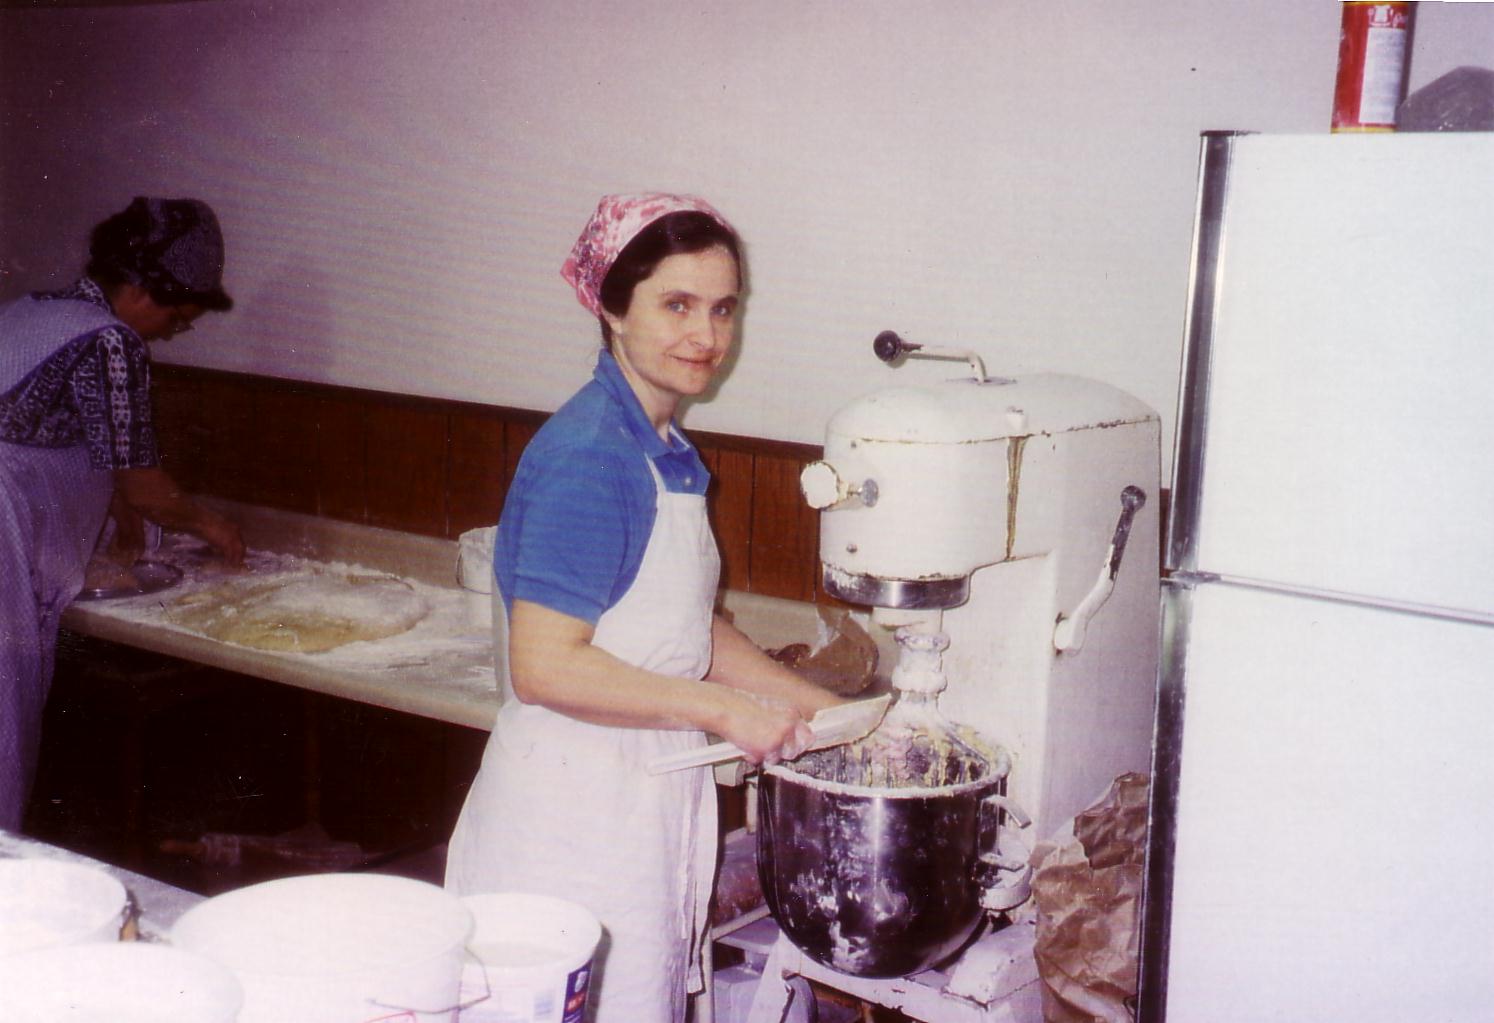 Our Story - Marlene Banwart next to old mixer from their kitchen